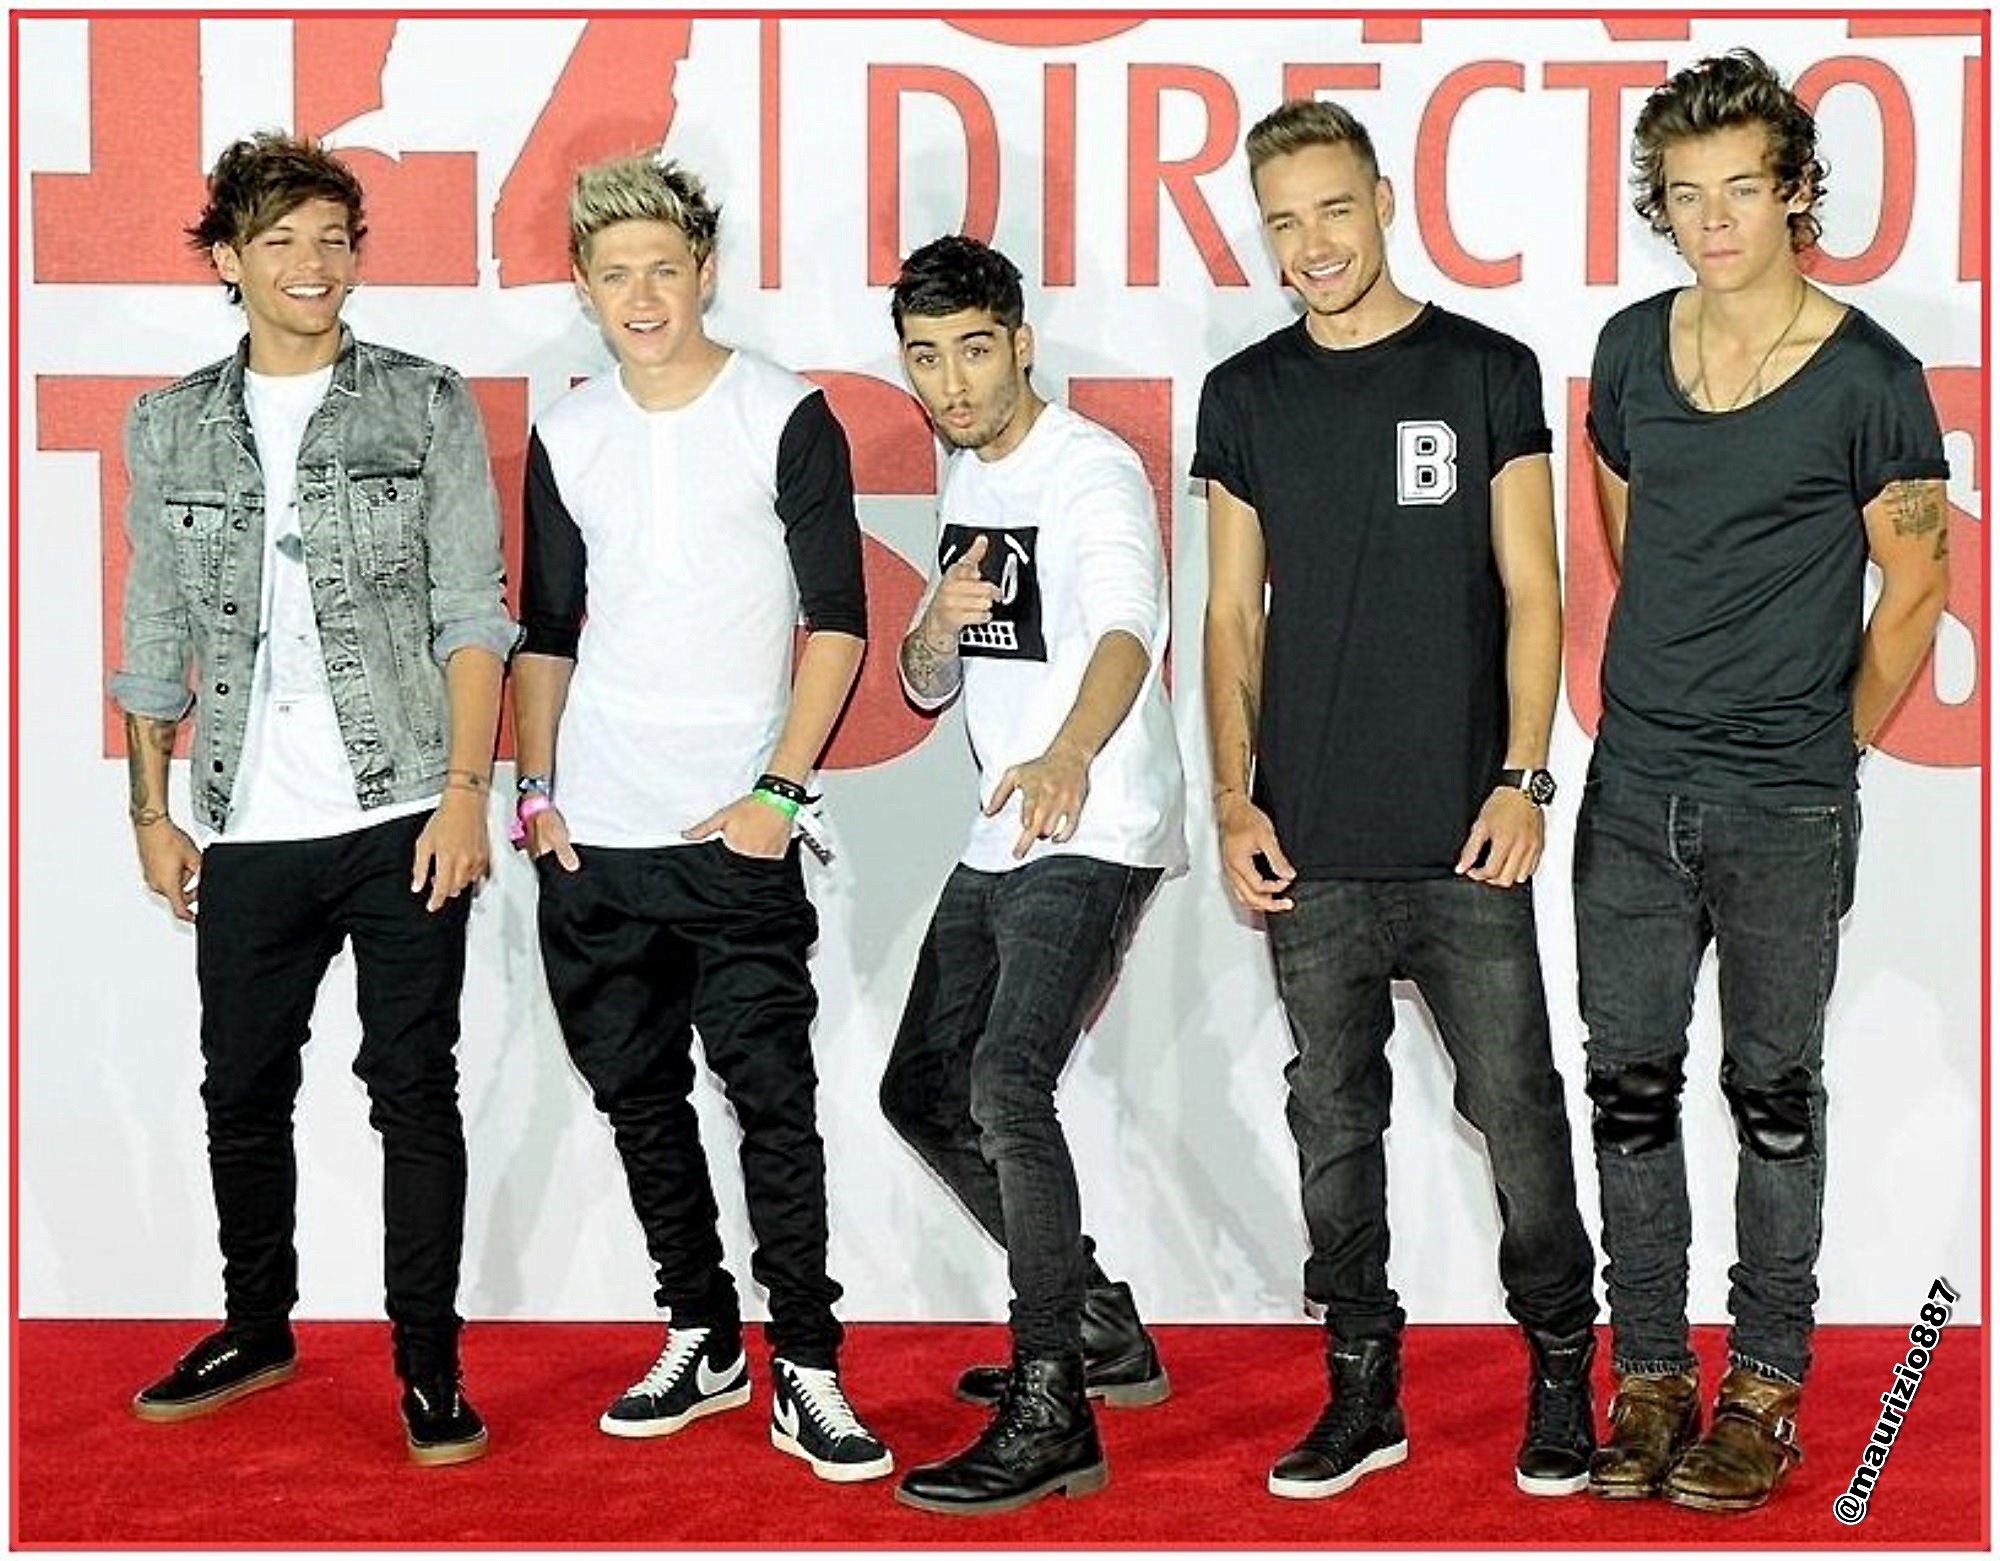 2000x1561 one direction HD Wallpaper and background photos of one direction 2013 for  fans of One Direction images.